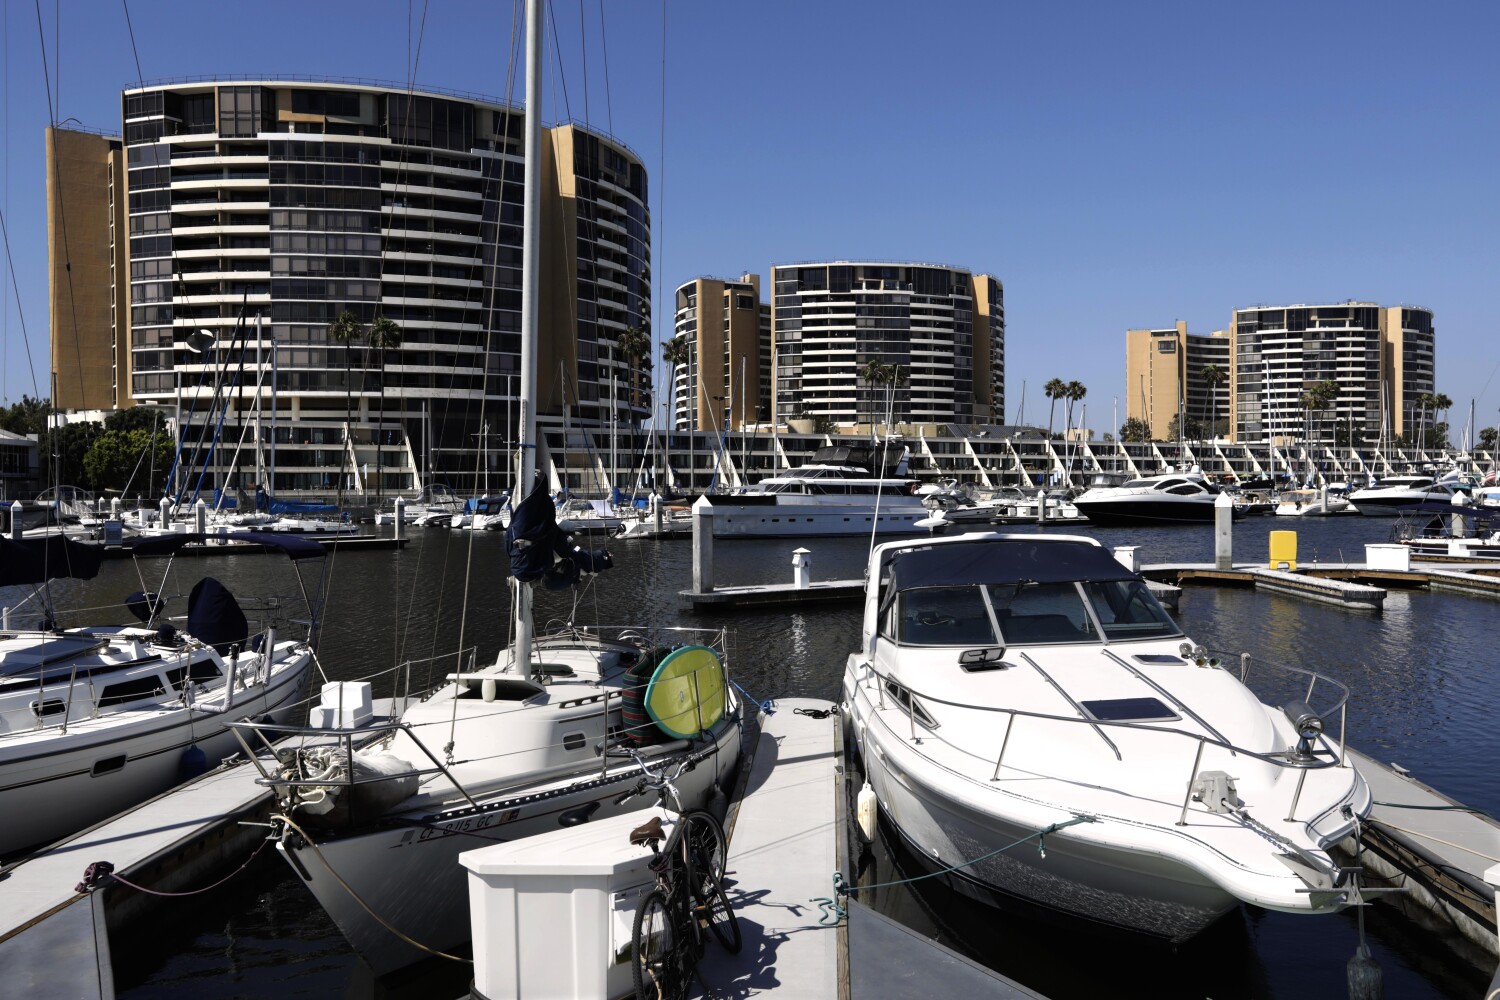 After Florida collapse, Marina del Rey condos found to be safe but in need of repair